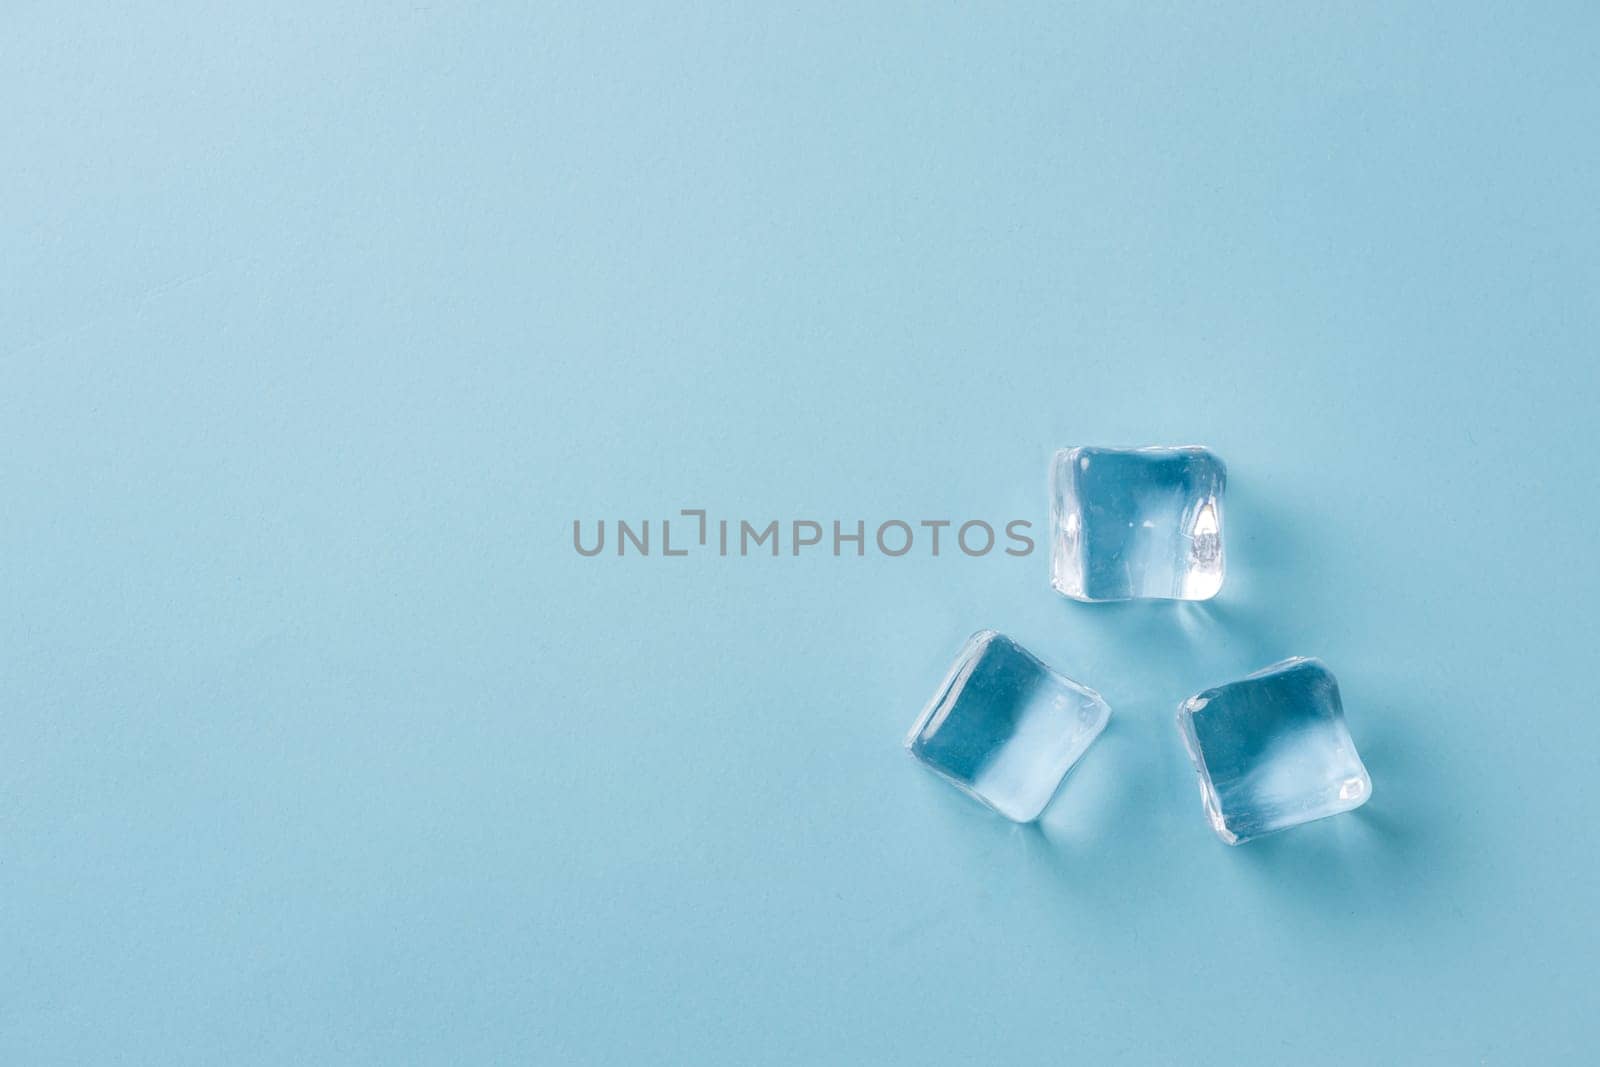 top view of ice cubes of different sizes on blue background by Sonat